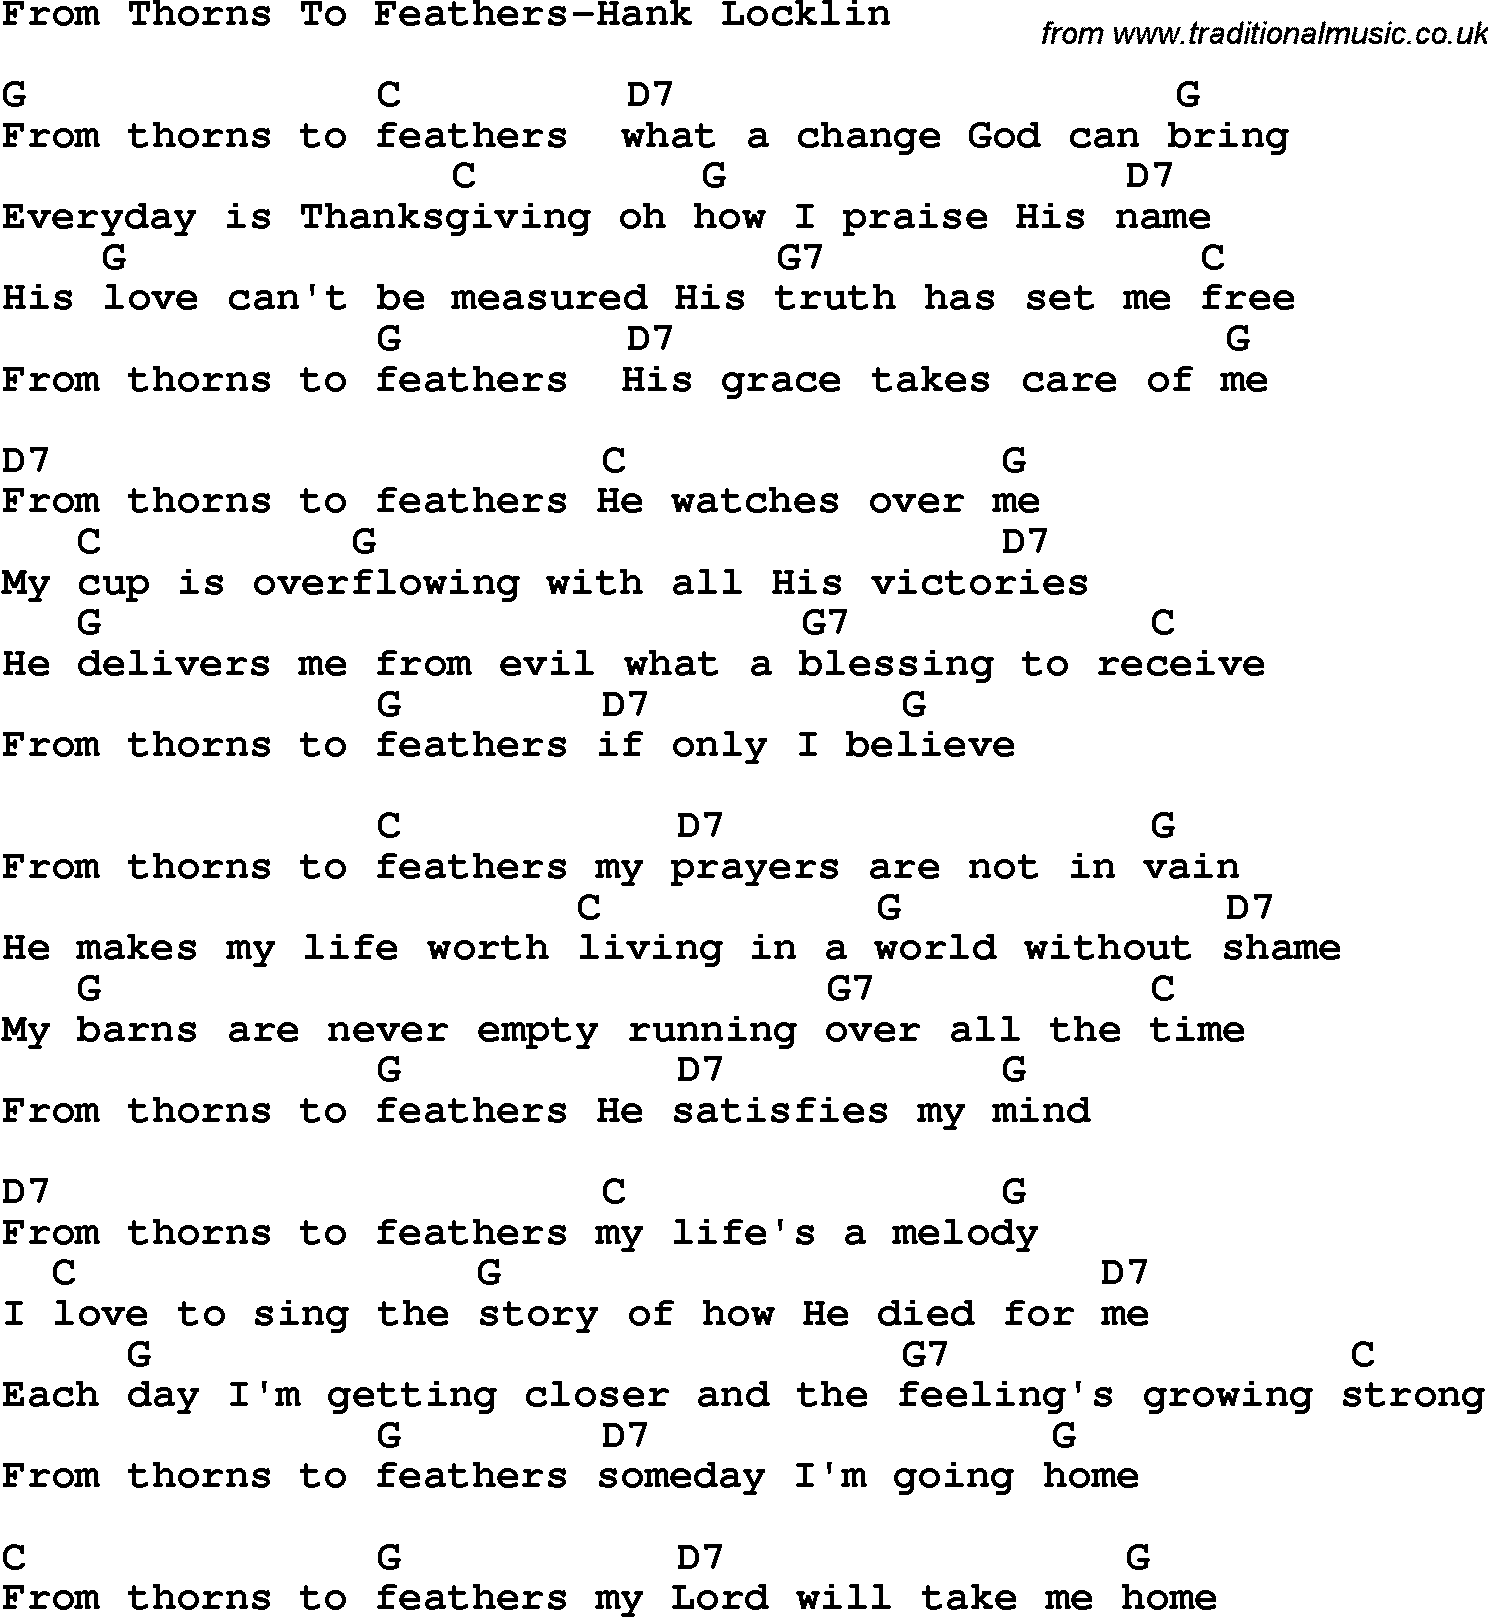 Country, Southern and Bluegrass Gospel Song From Thorns To Feathers-Hank Locklin lyrics and chords